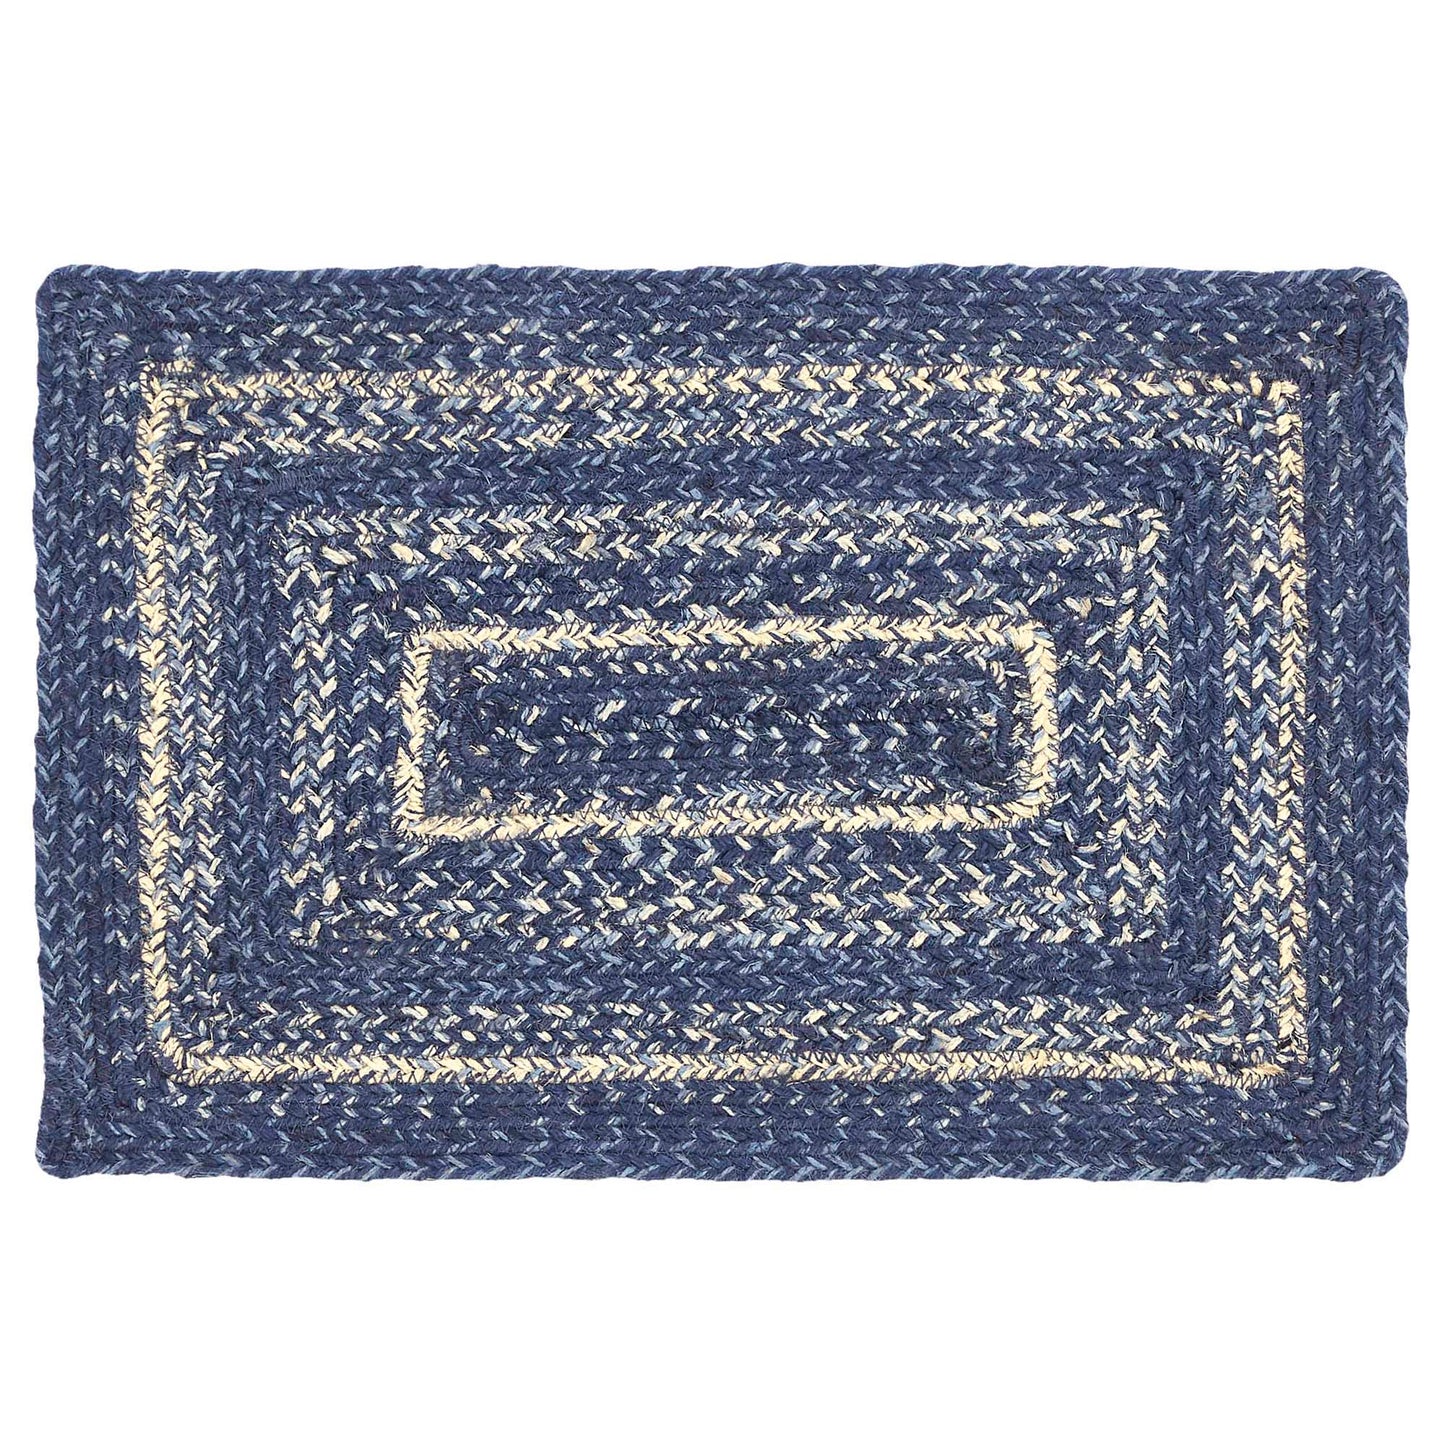 67101-Great-Falls-Blue-Jute-Rect-Placemat-10x15-image-1